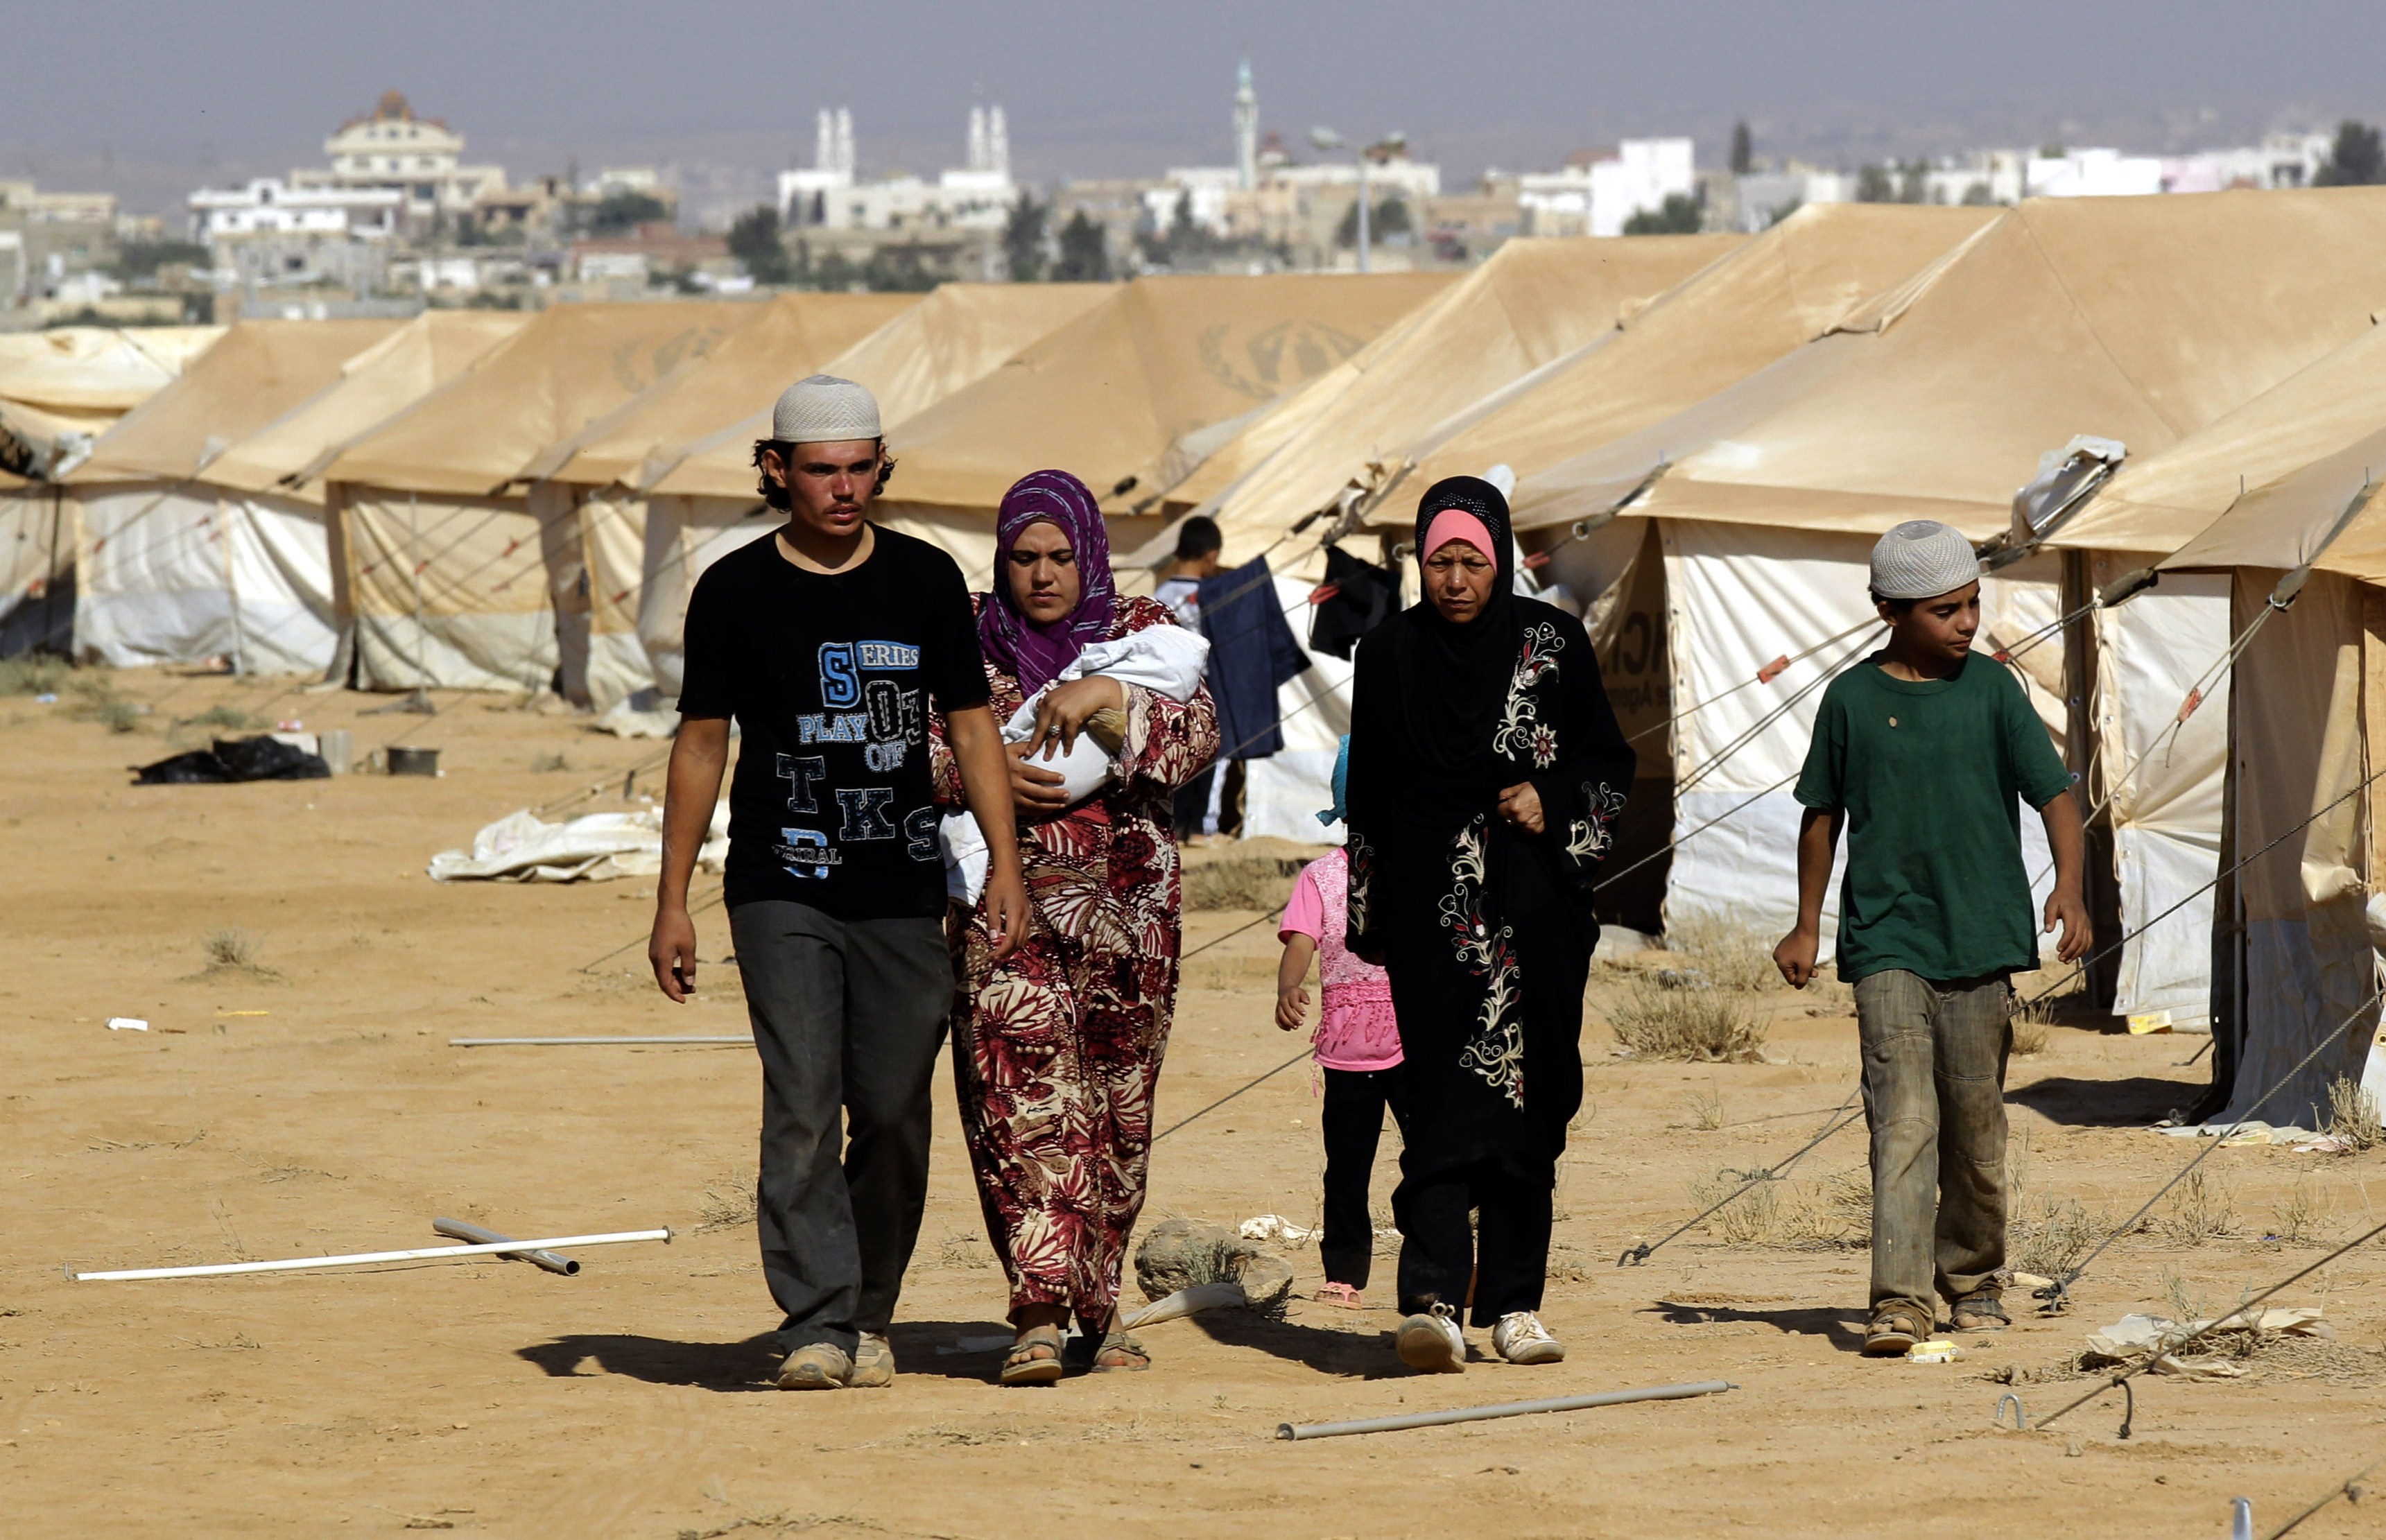 A Syrian family walk past tents at the Zaatari camp near the northern Jordanian city of Mafraq on 12 August, where French medics recently delivered tonnes of supplies and medical equipment AFP PHOTO/KHALIL MAZRAAWI